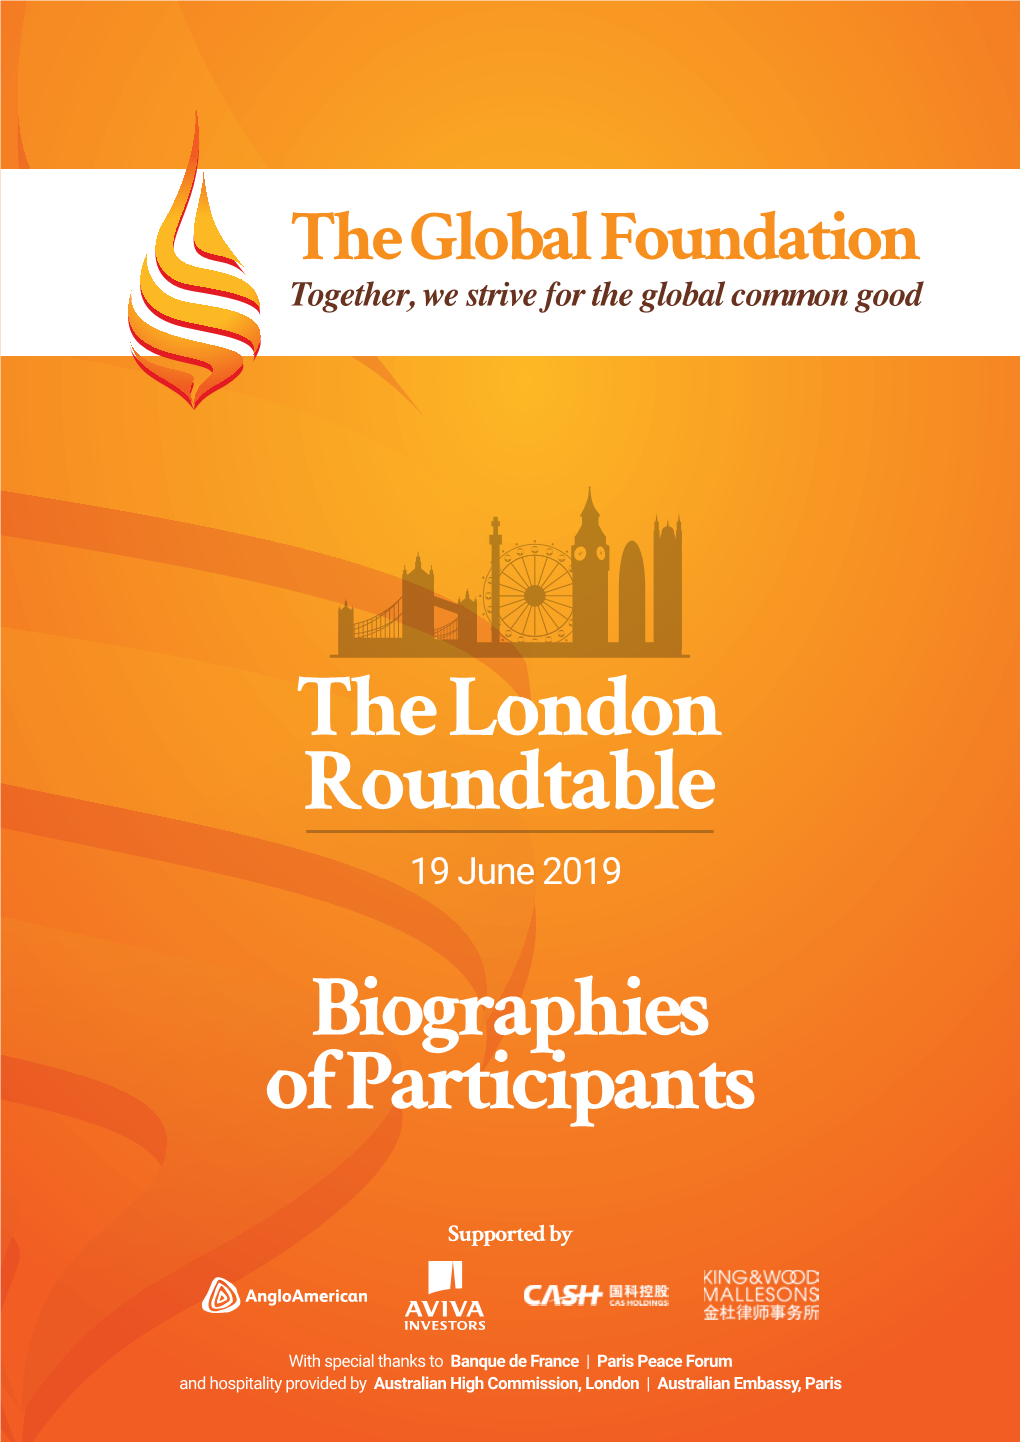 The London Roundtable 19 June 2019